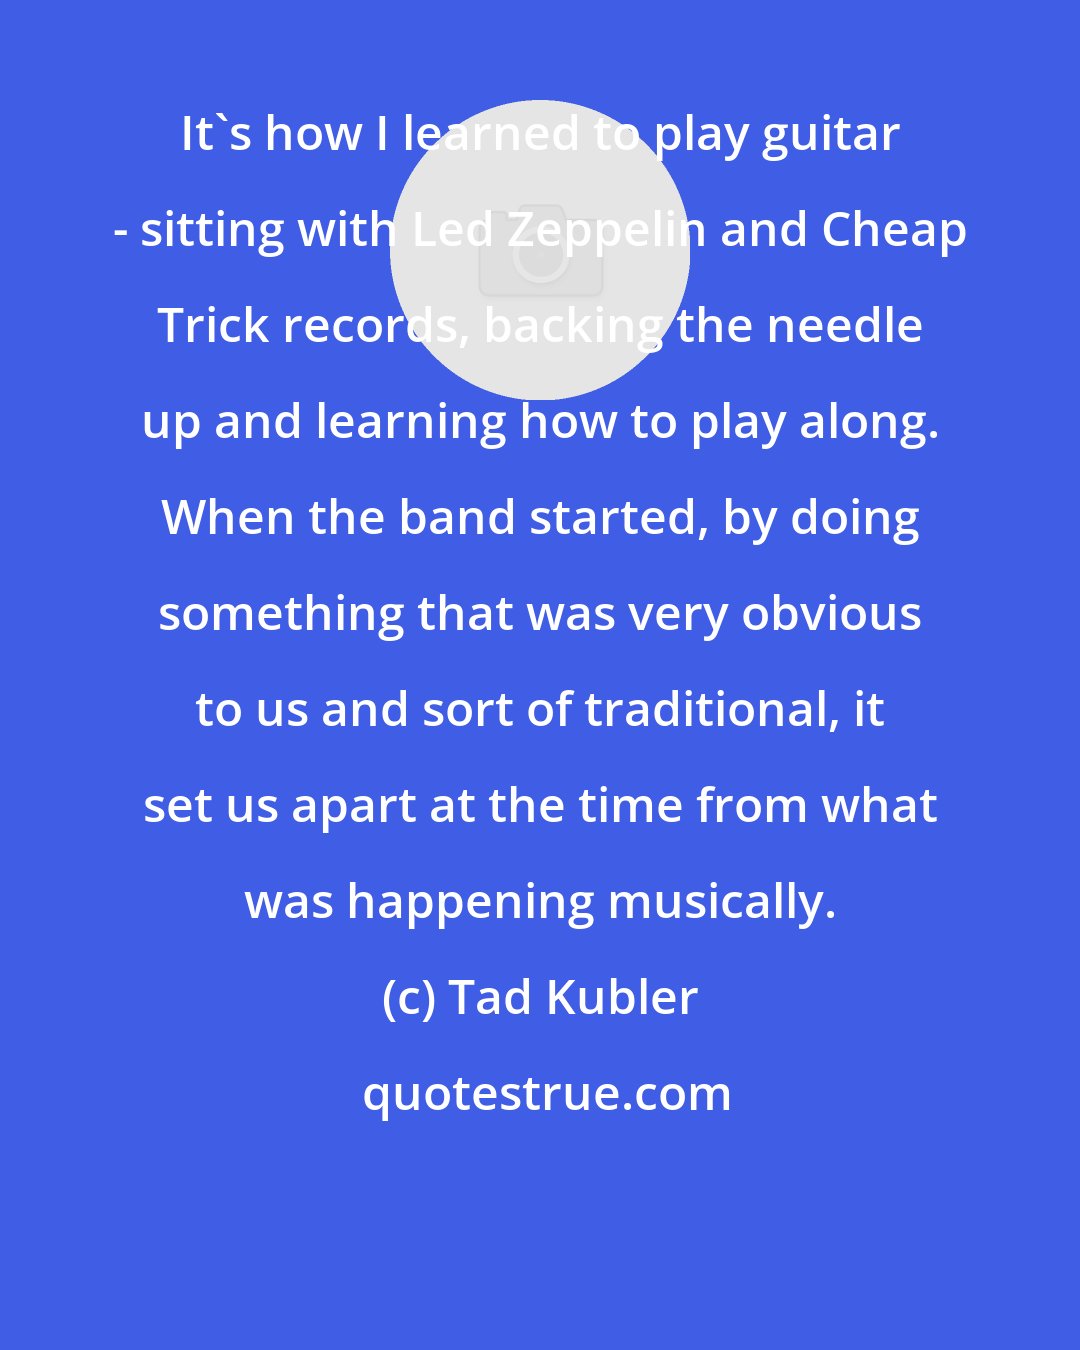 Tad Kubler: It's how I learned to play guitar - sitting with Led Zeppelin and Cheap Trick records, backing the needle up and learning how to play along. When the band started, by doing something that was very obvious to us and sort of traditional, it set us apart at the time from what was happening musically.